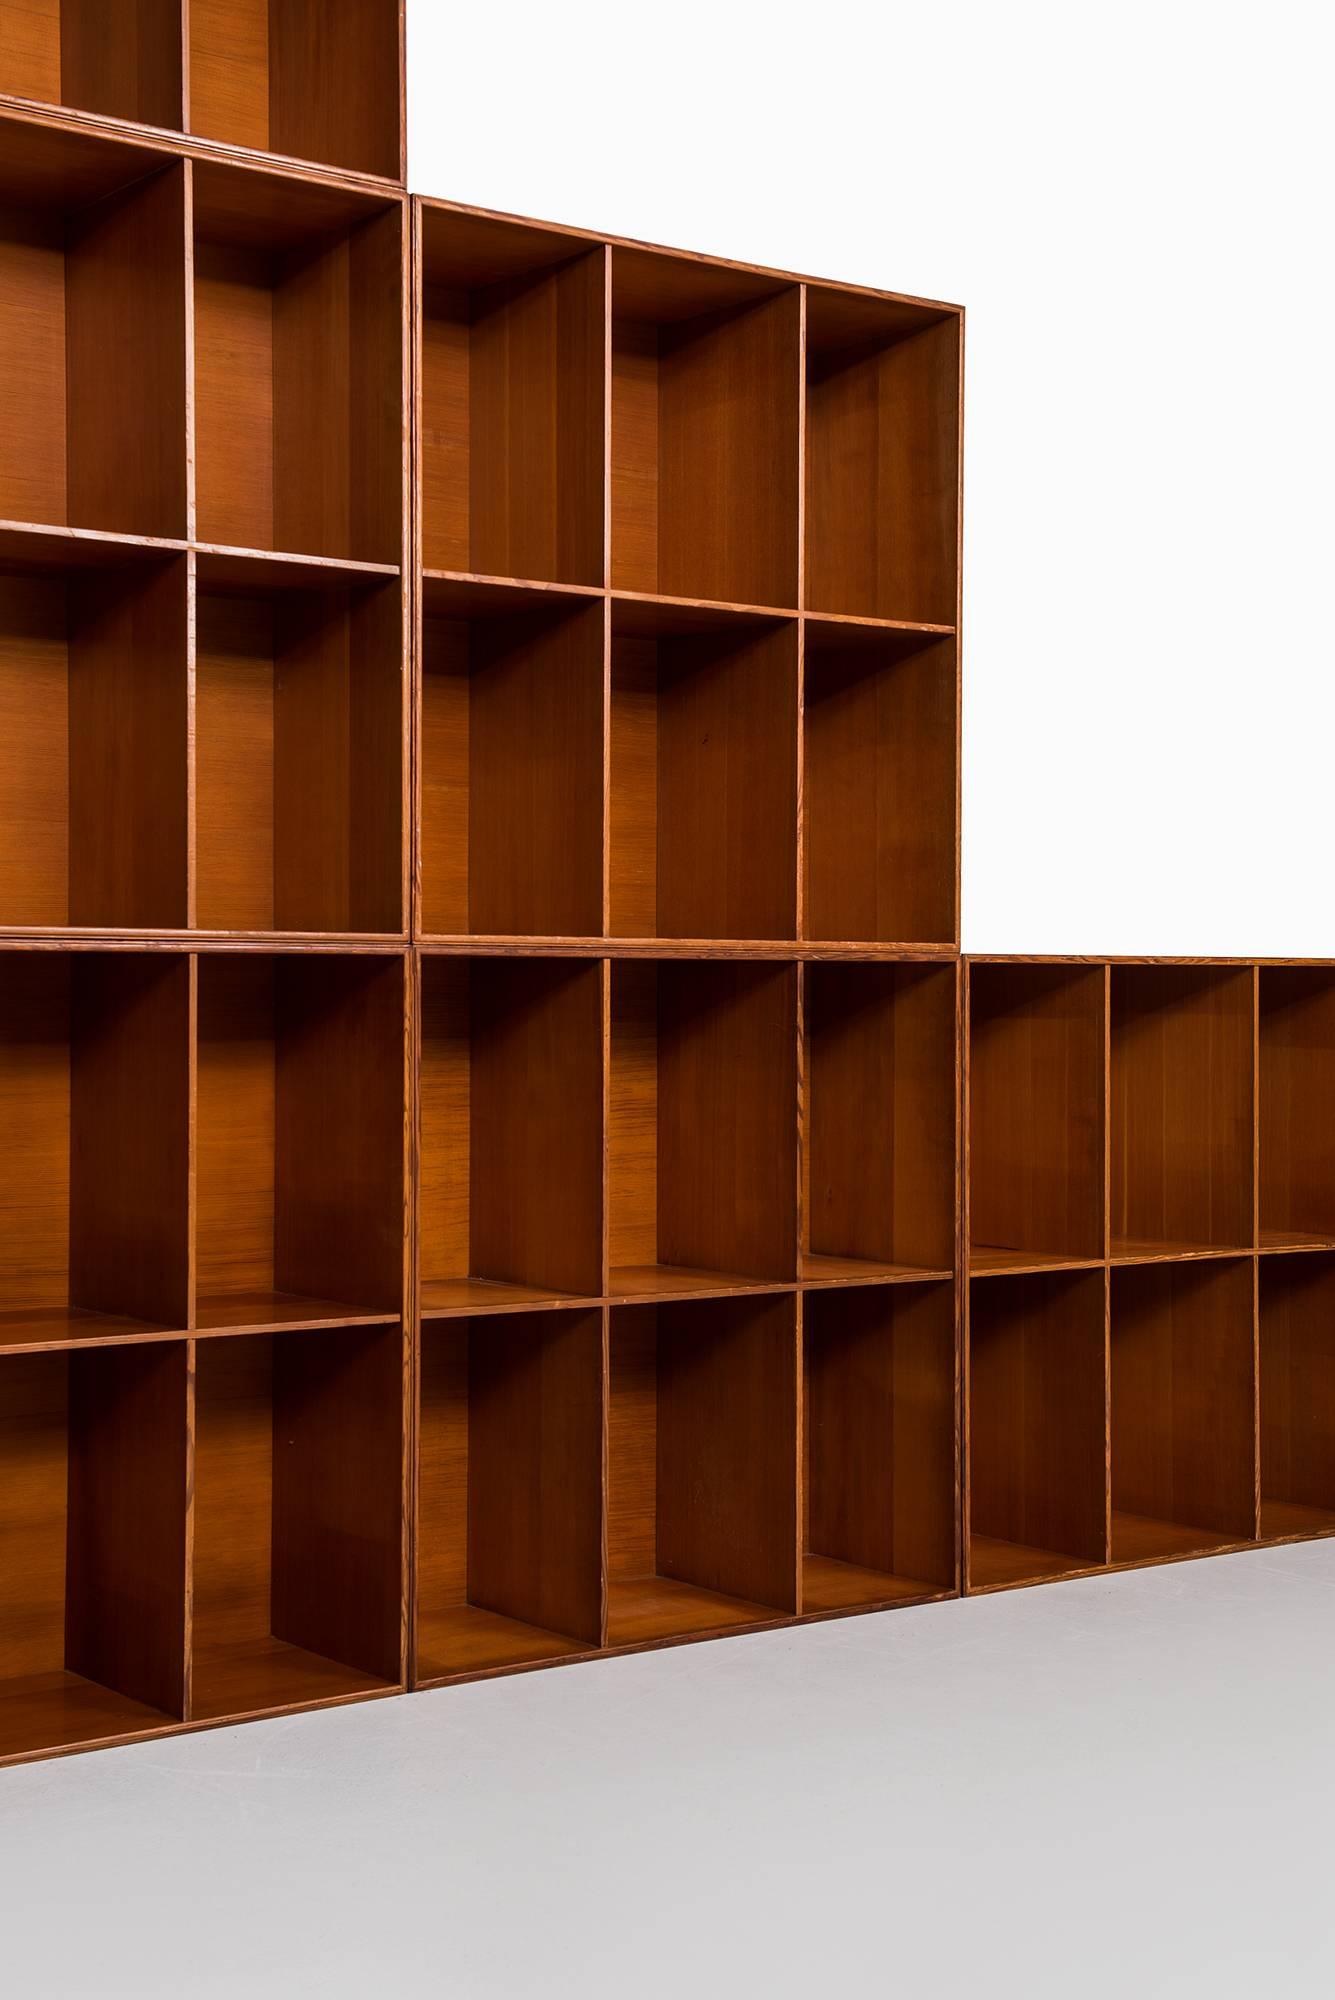 Set of six bookcases designed by Mogens Koch. Produced by Rud Rasmussen in Denmark.